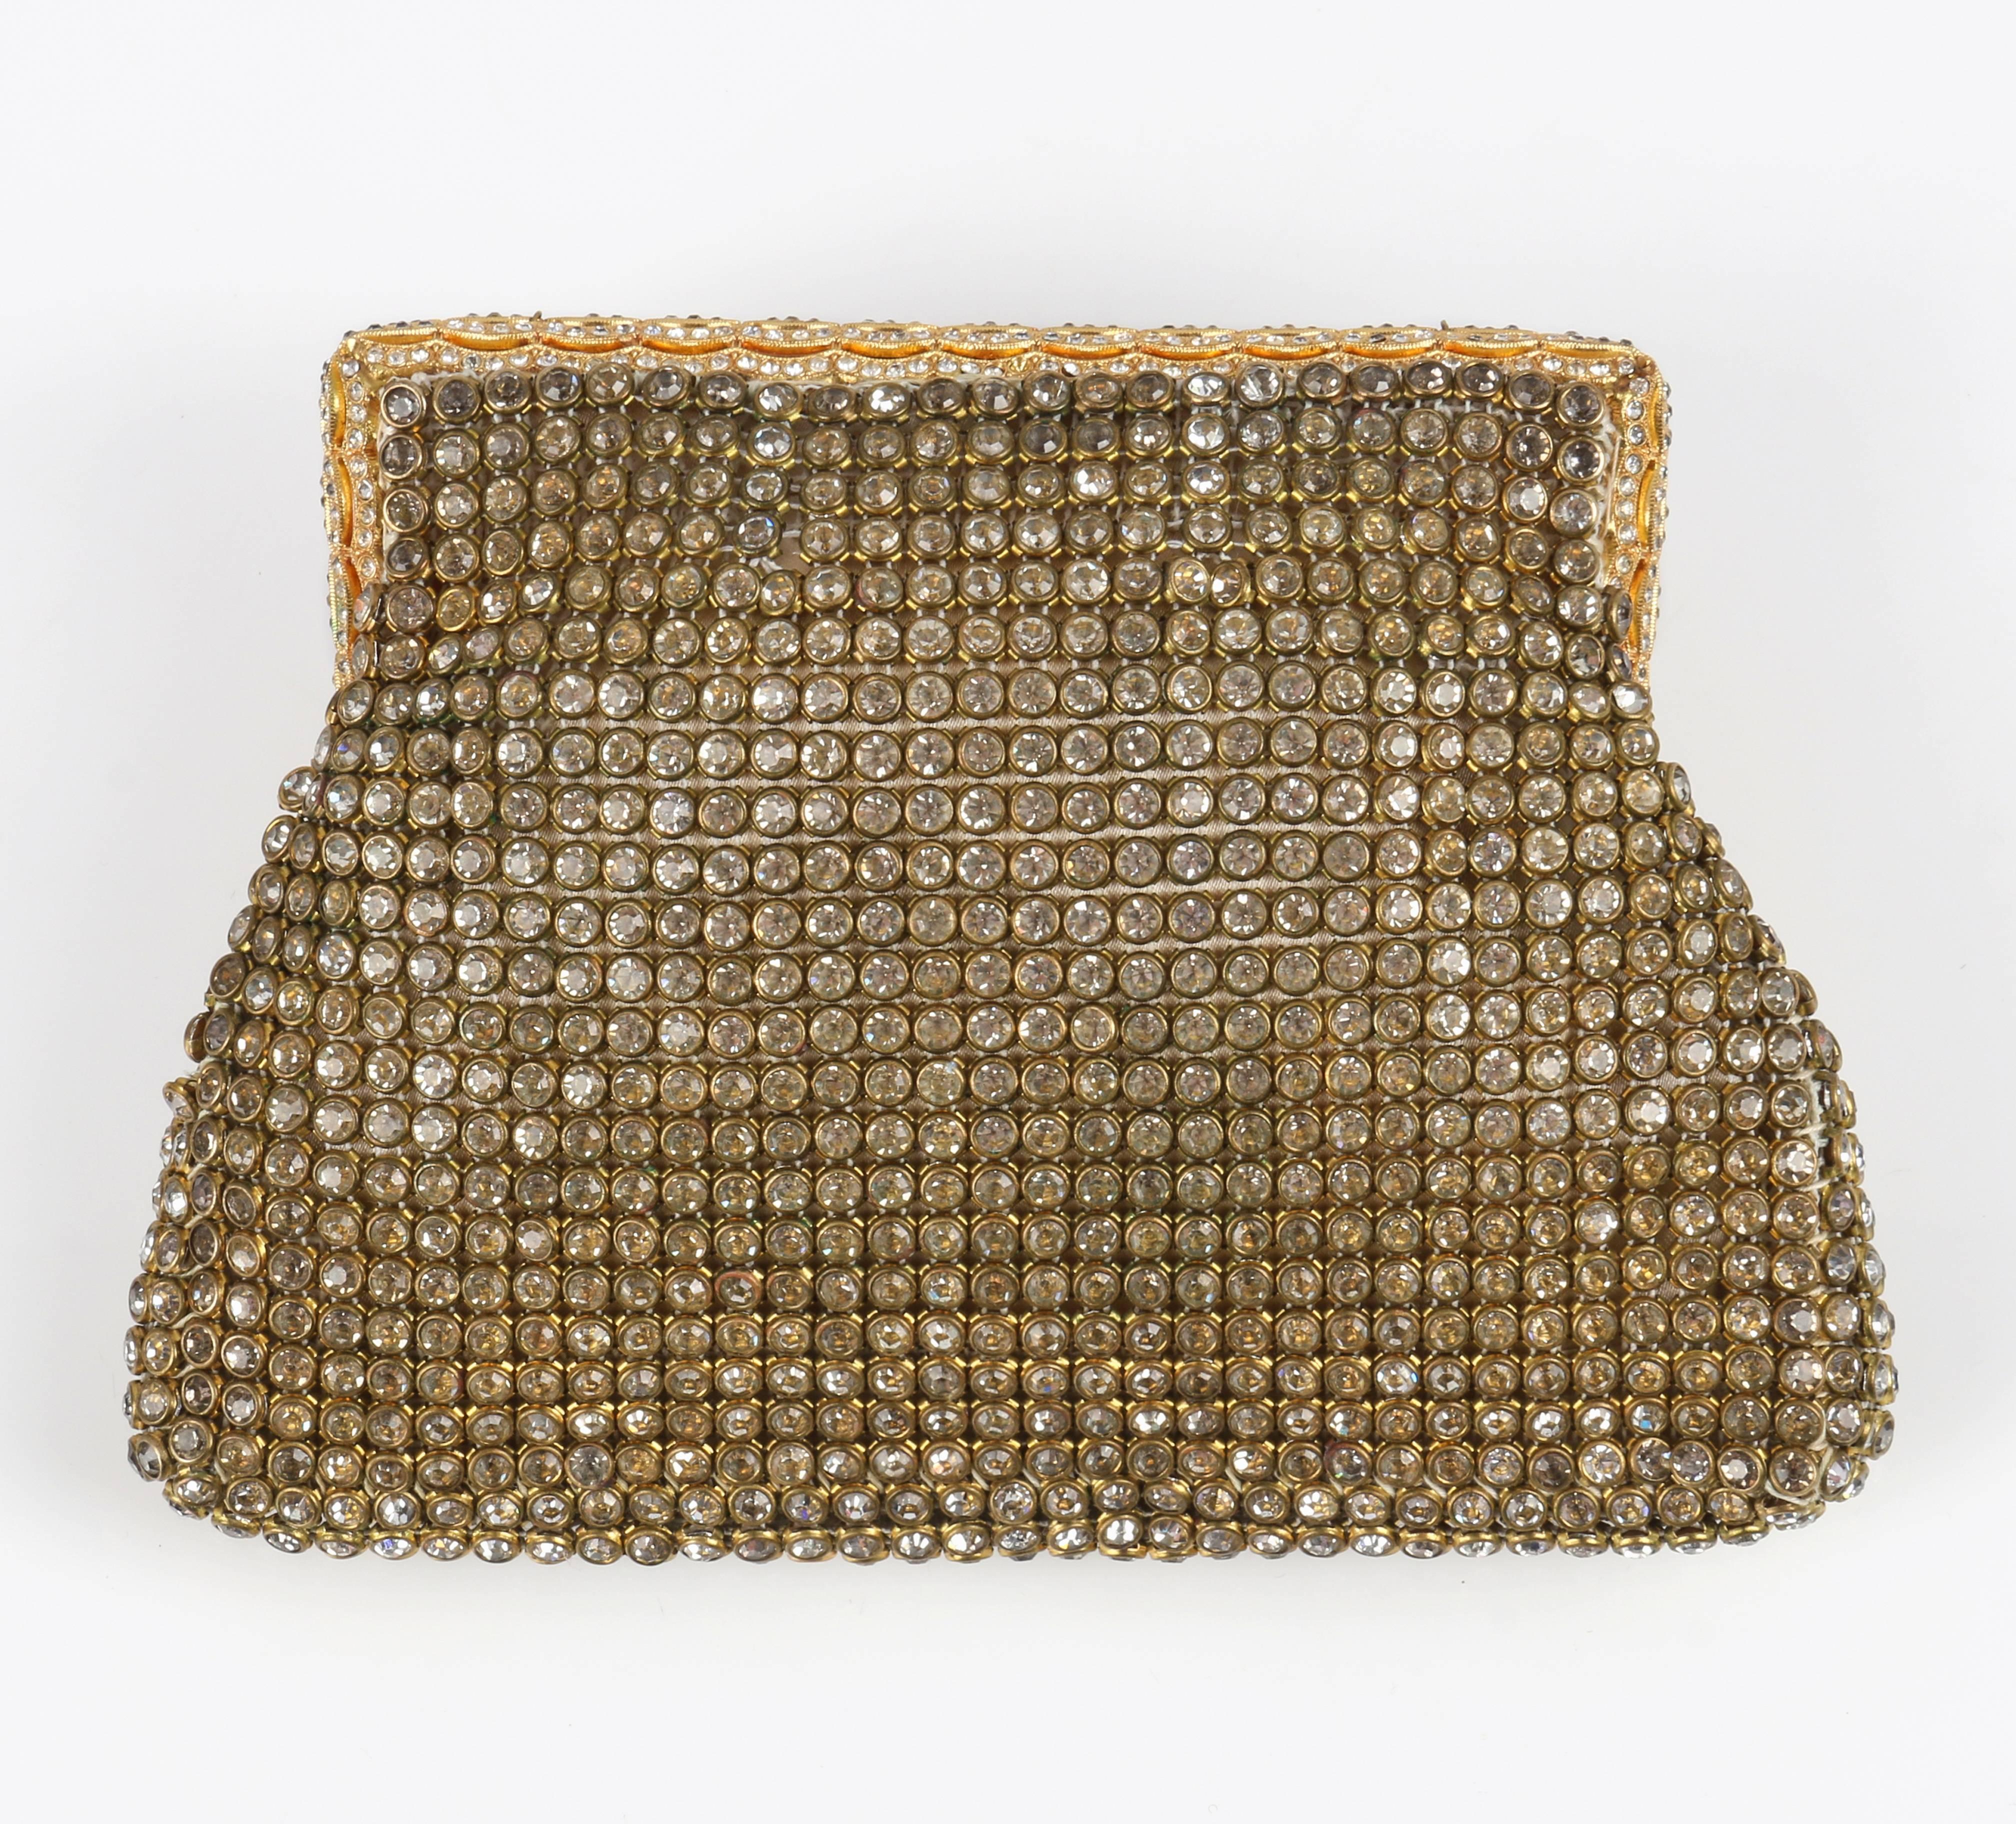 Vintage c.1950's gold rhinestone mesh evening bag. Rhinestone mesh body. Rectangular frame with scalloped open work gold toned metal and rhinestone detail. Hinge clasp closure with matching scallop detail. Fully lined in cream satin silk. Unmarked.